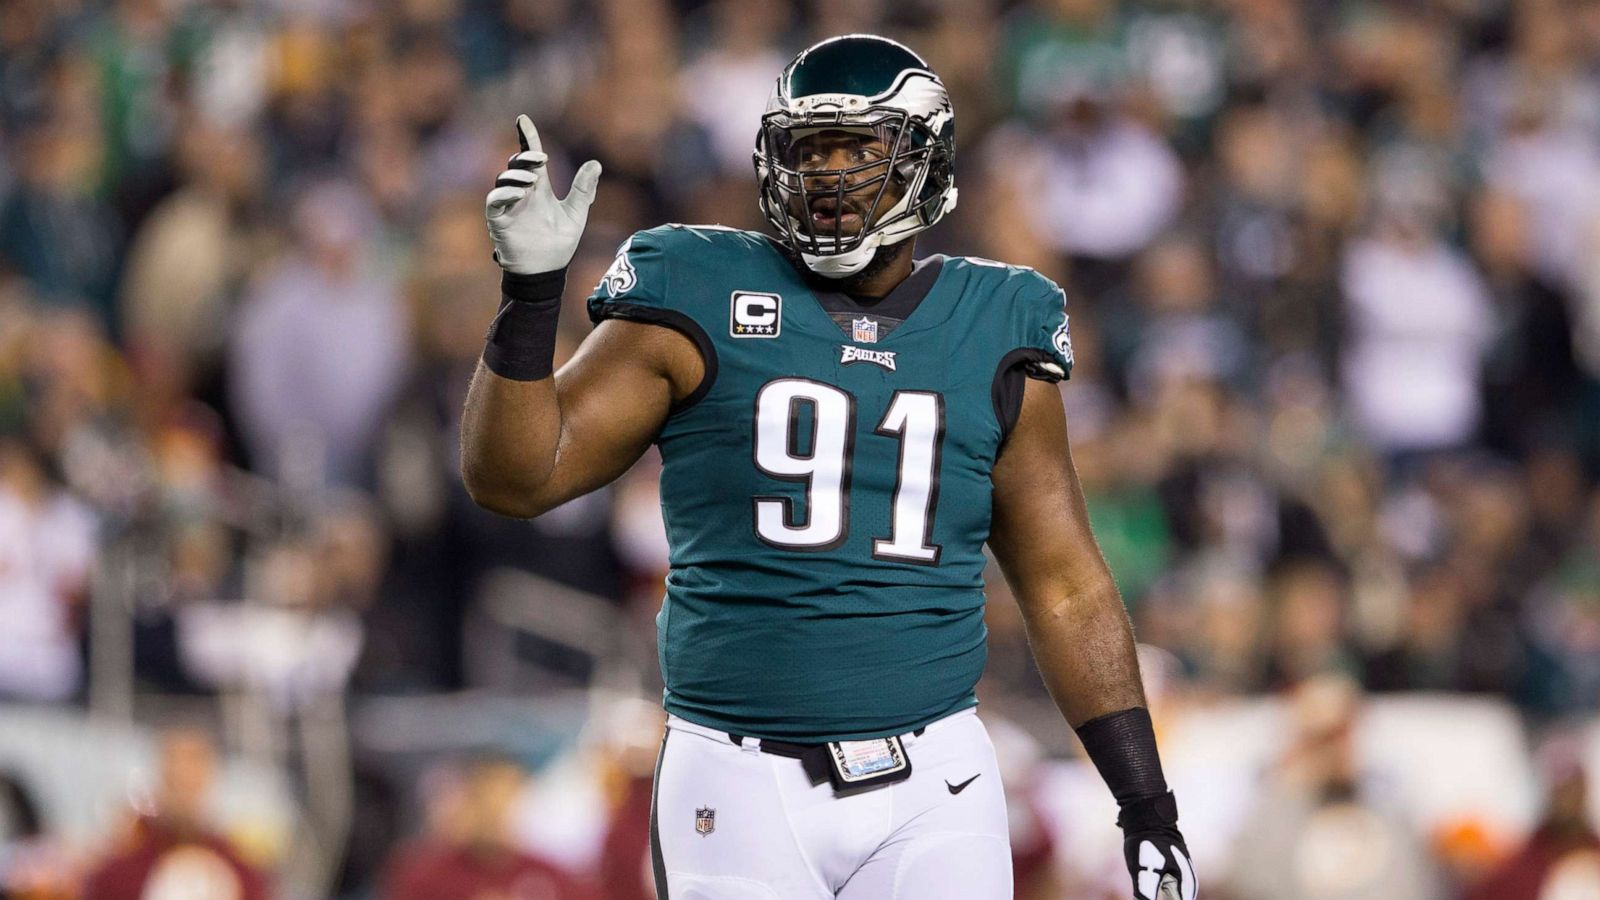 NFL player Fletcher Cox calls 911 as man allegedly attempts to